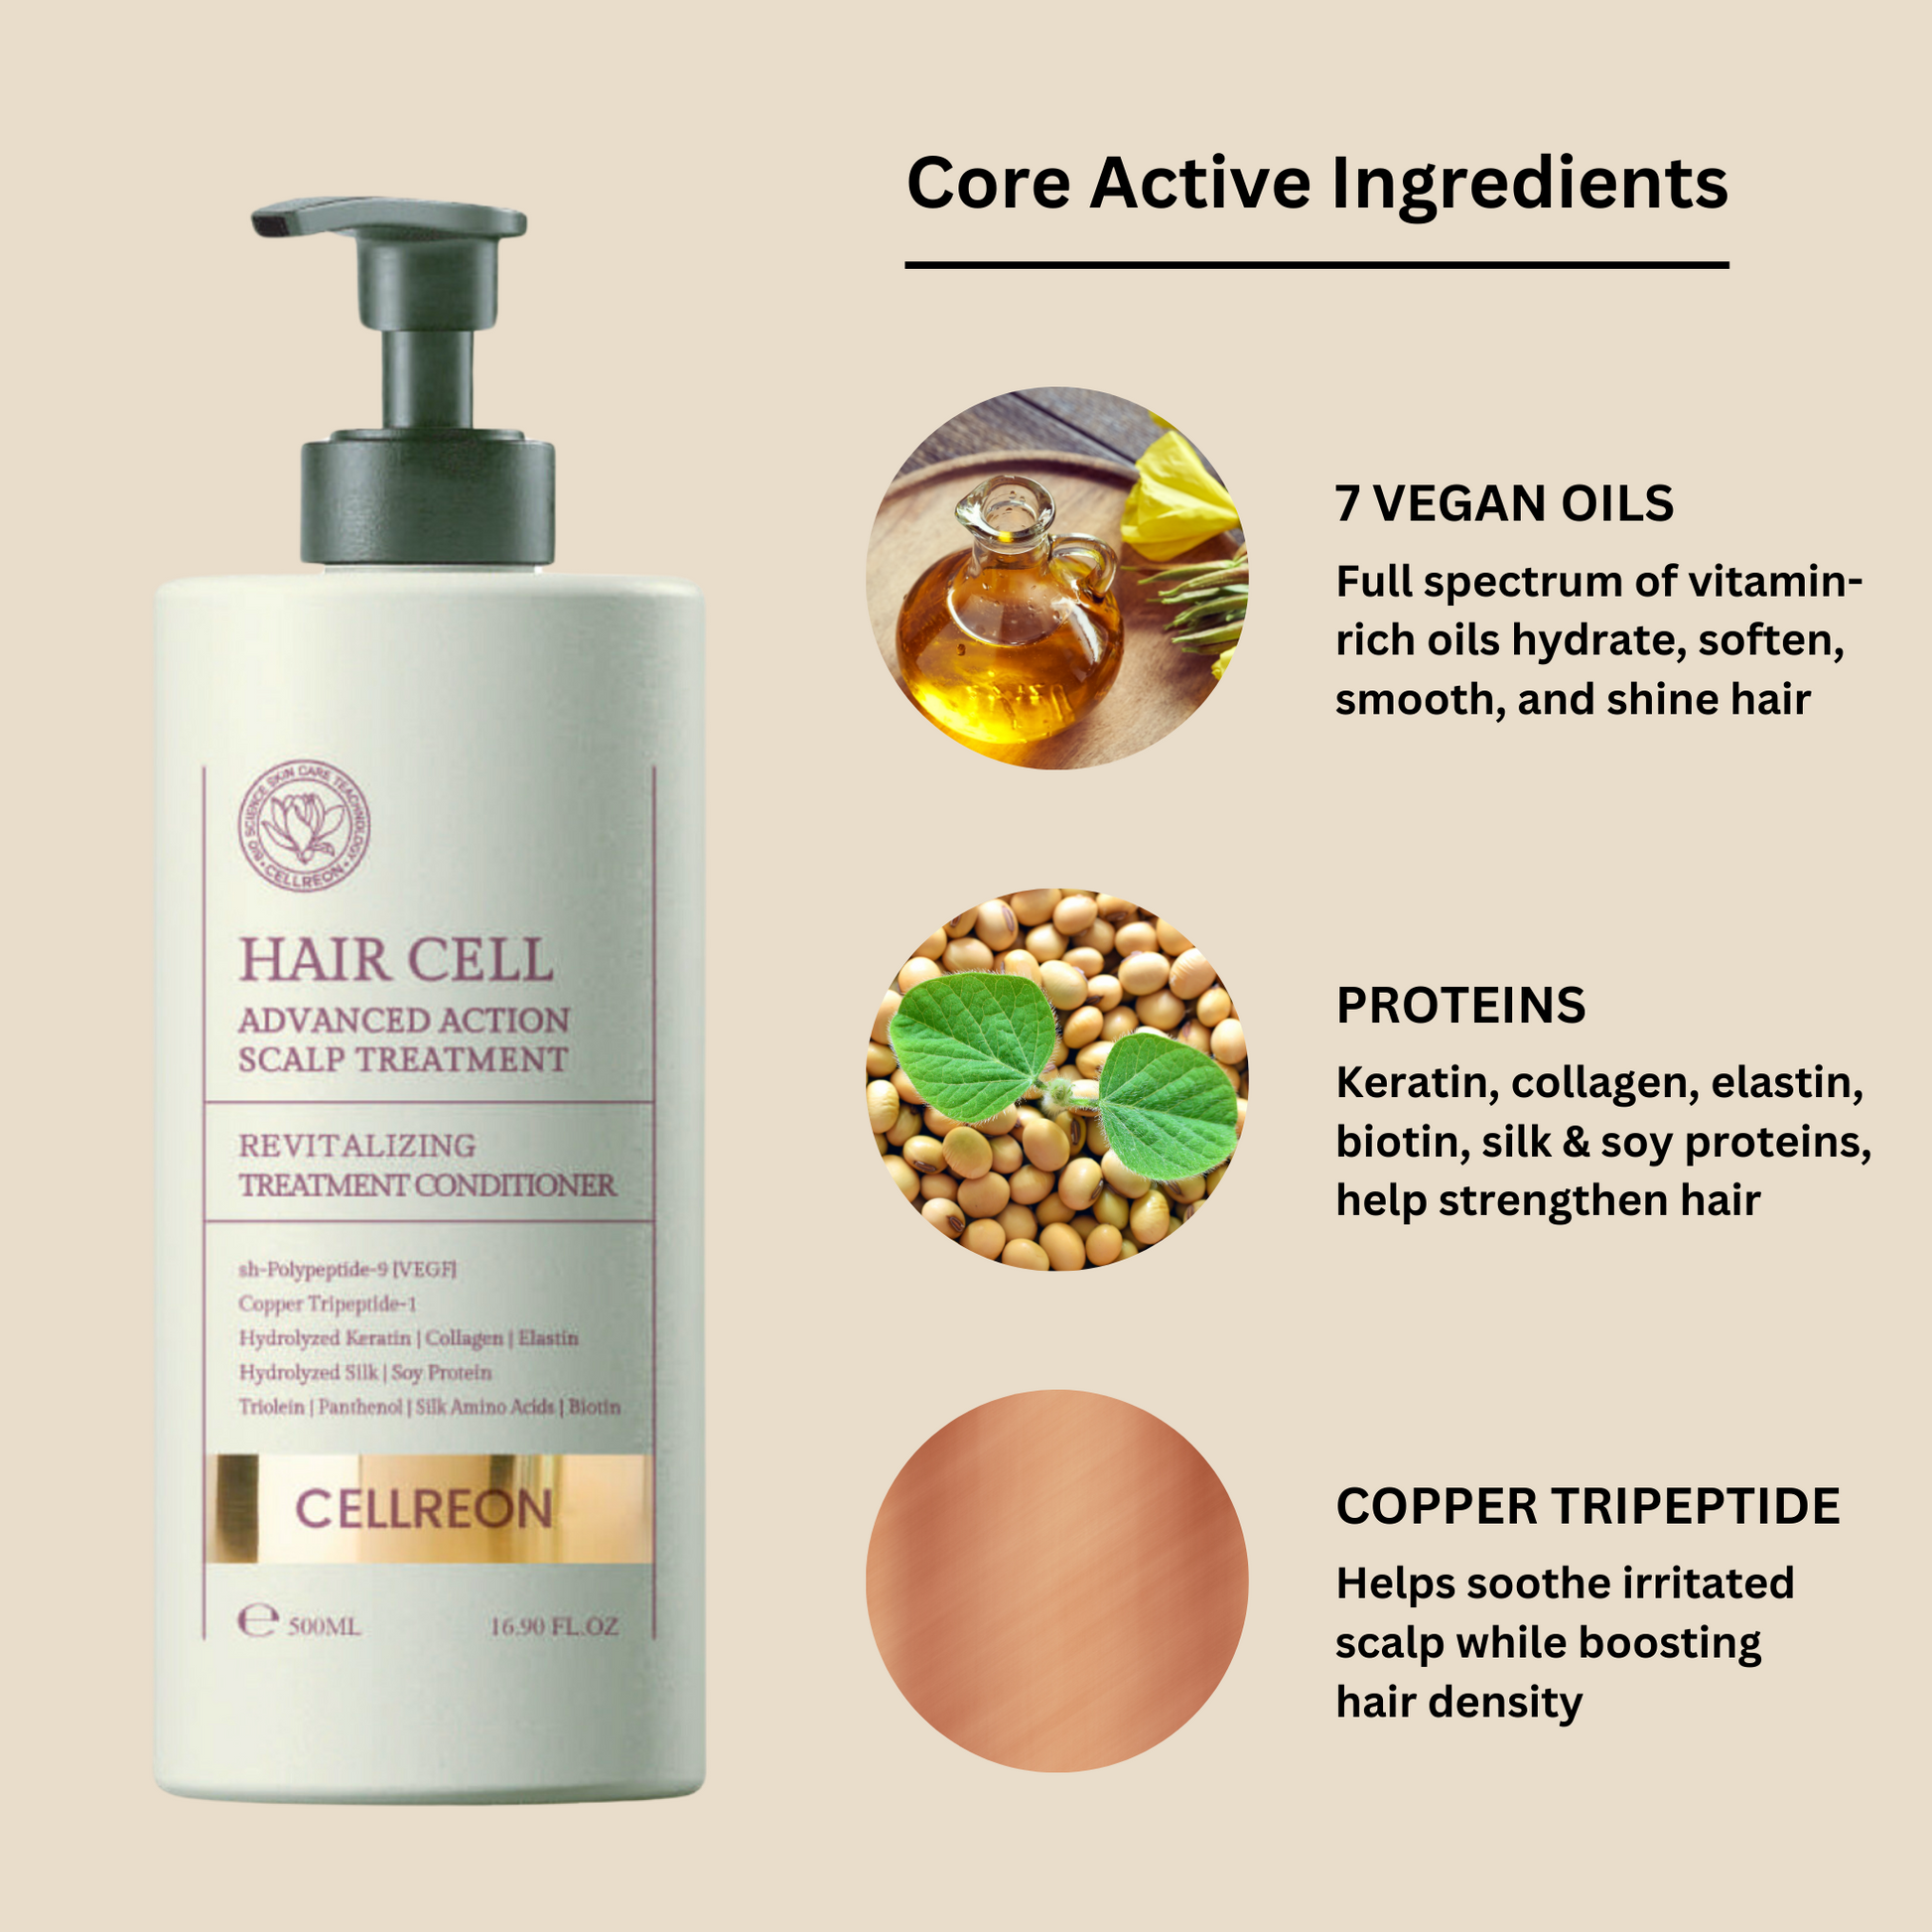 Hair Cell Revitalizing Treatment Conditioner